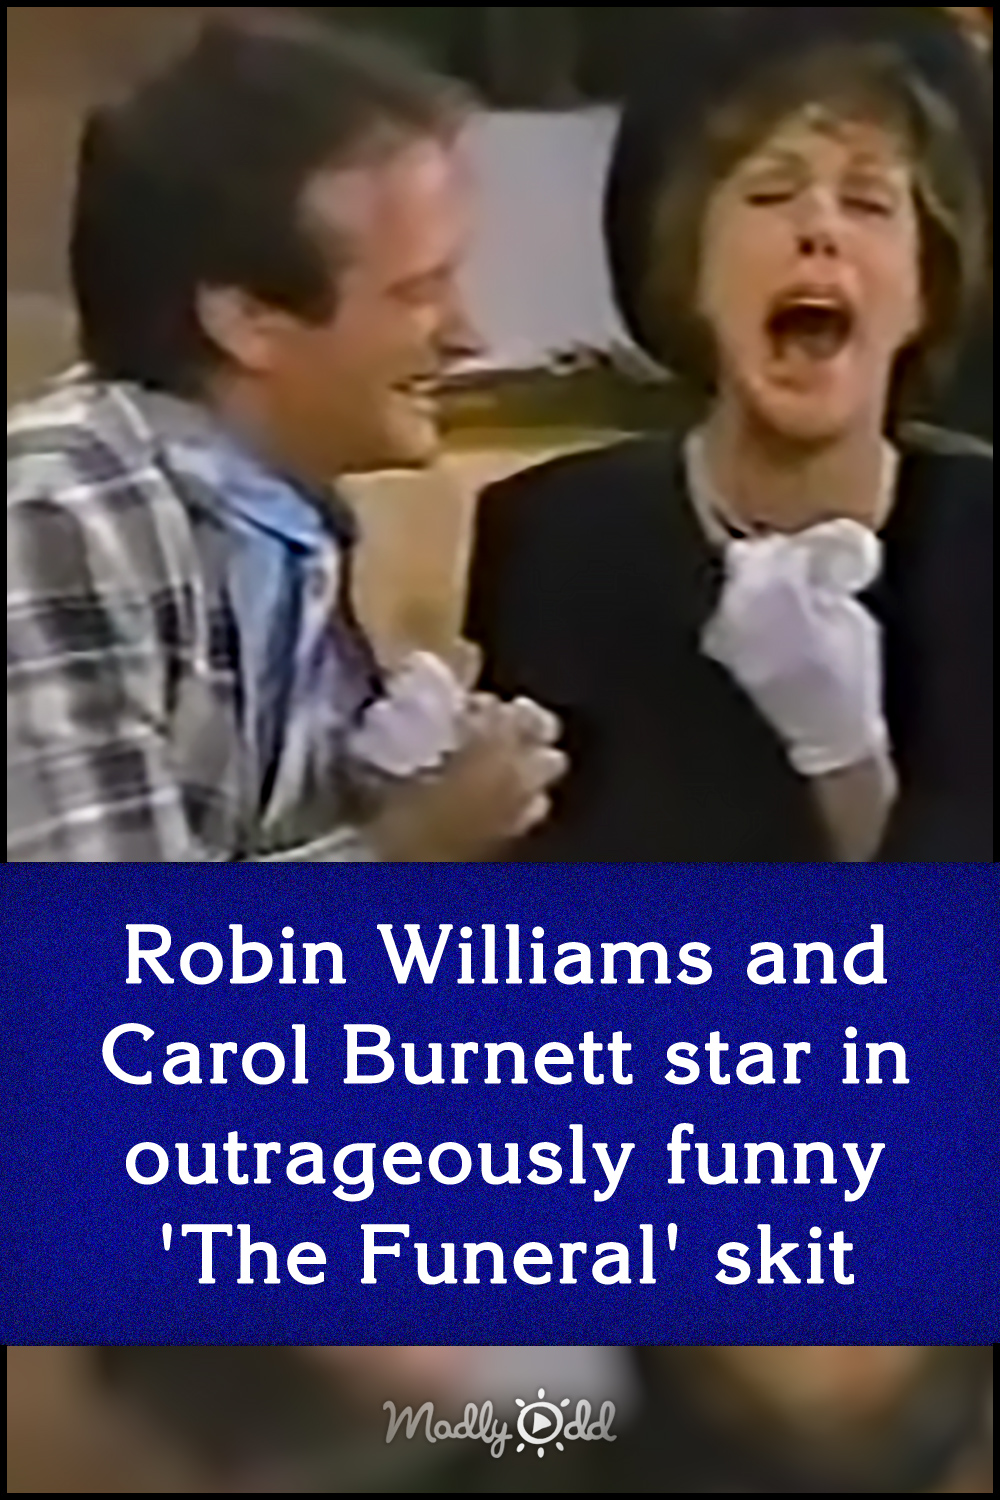 Robin Williams and Carol Burnett star in outrageously funny \'The Funeral\' skit